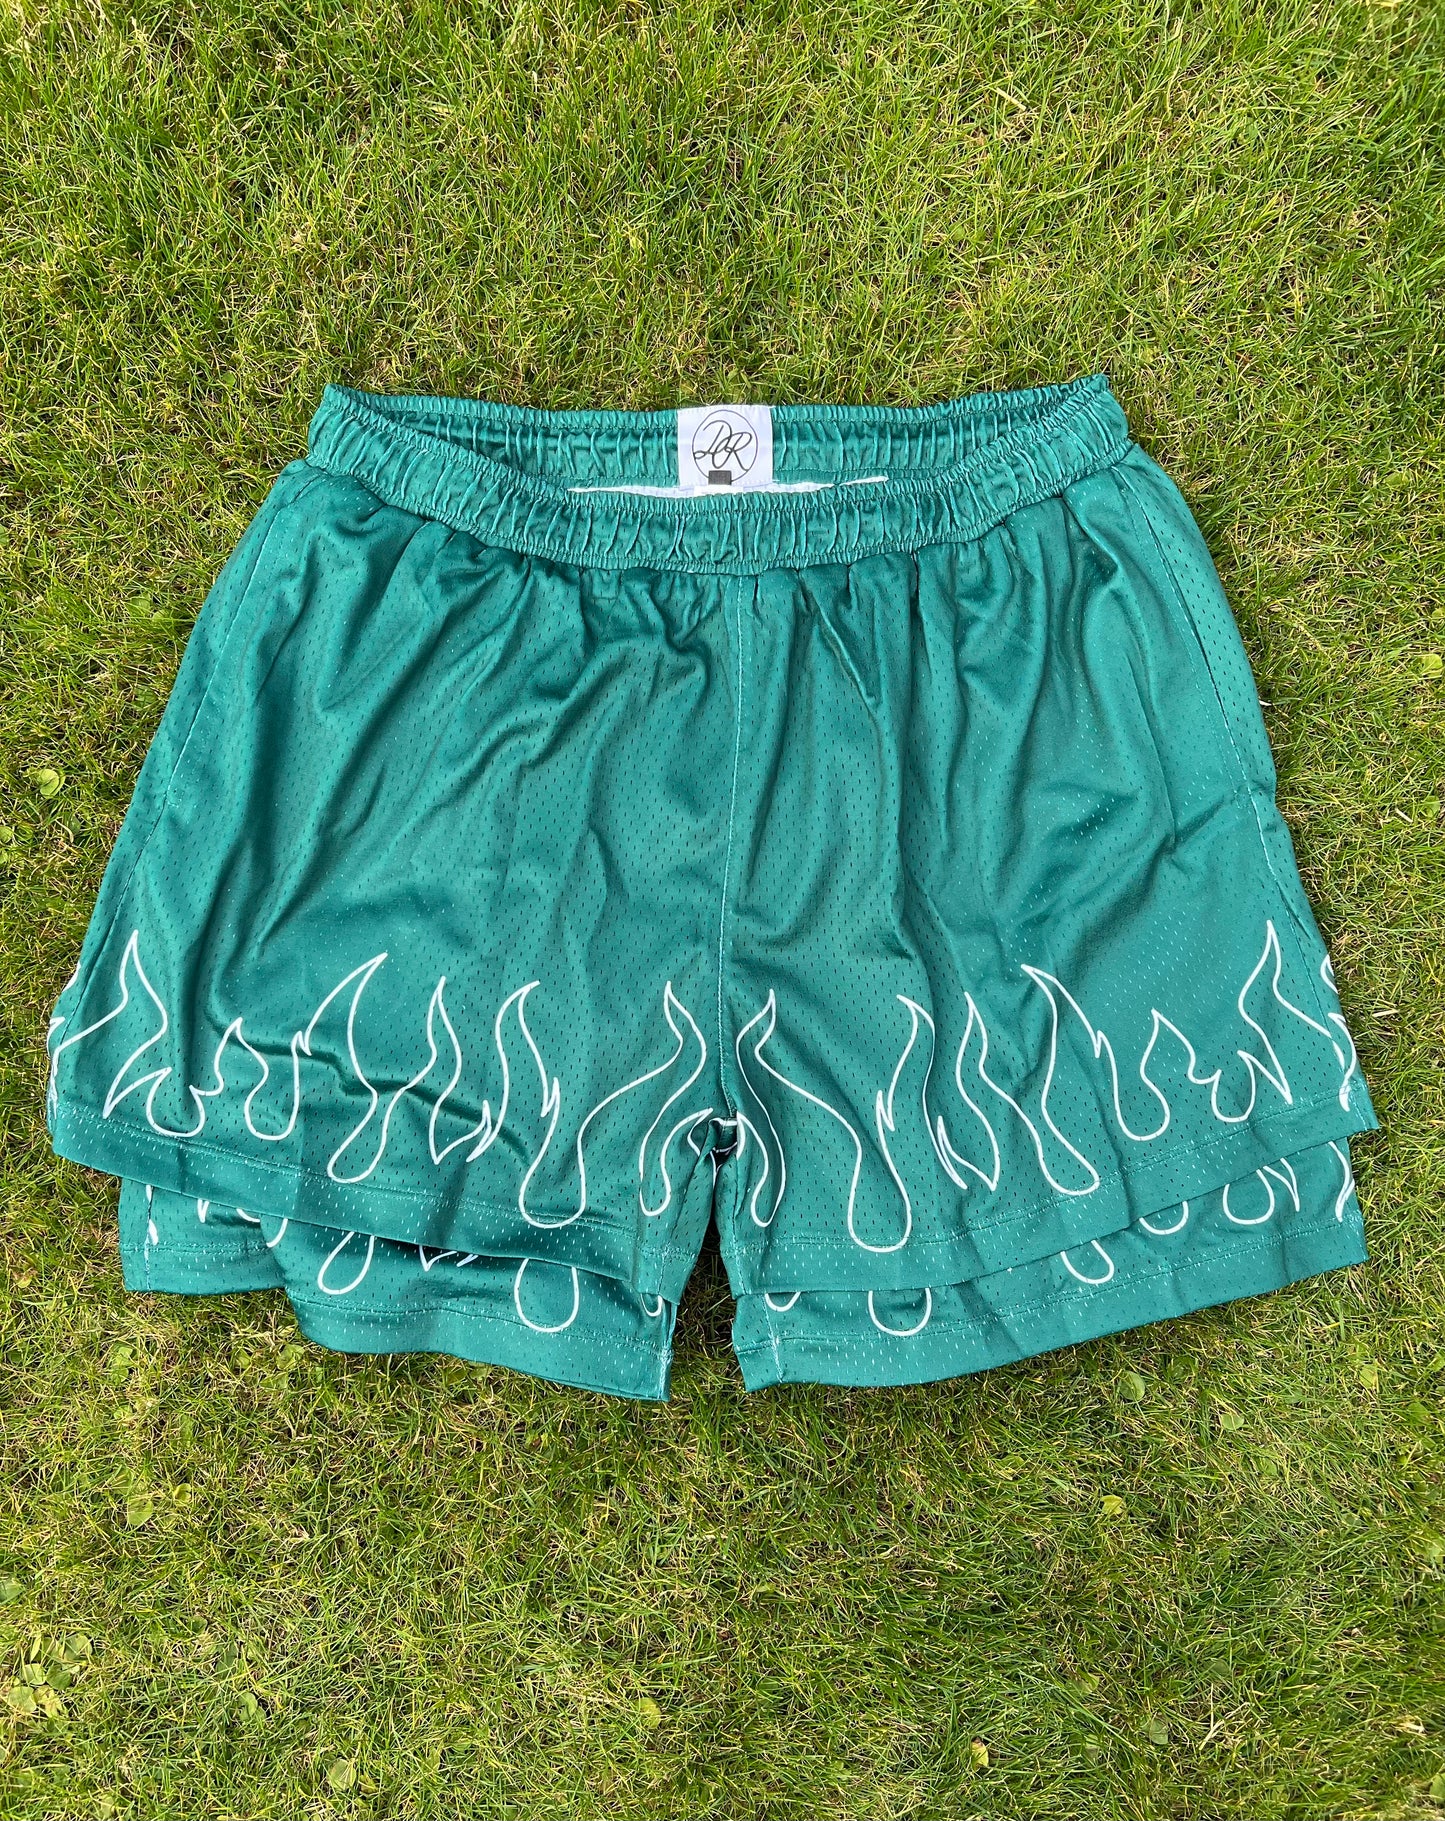 Blazing Style: Green Flames Shorts for a Fiery Look